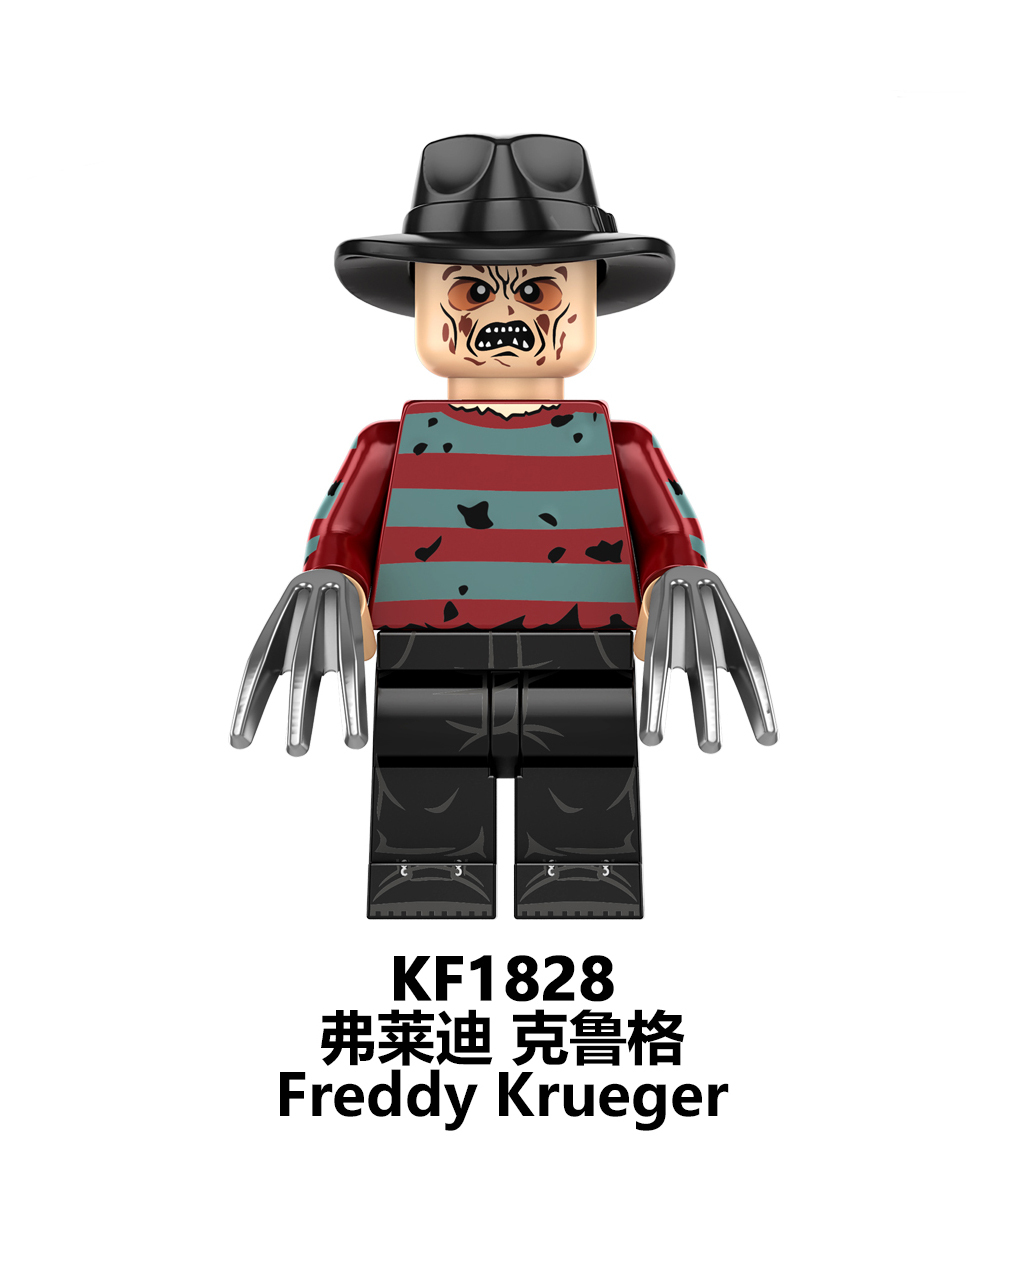 KF6176 KF1836 KF1837 KF1838 KF1839 KF1840 KF1841 KF1842 KF1843 Halloween Horror Series Building Blocks Action Figures Educational Toys For Kids Gifts